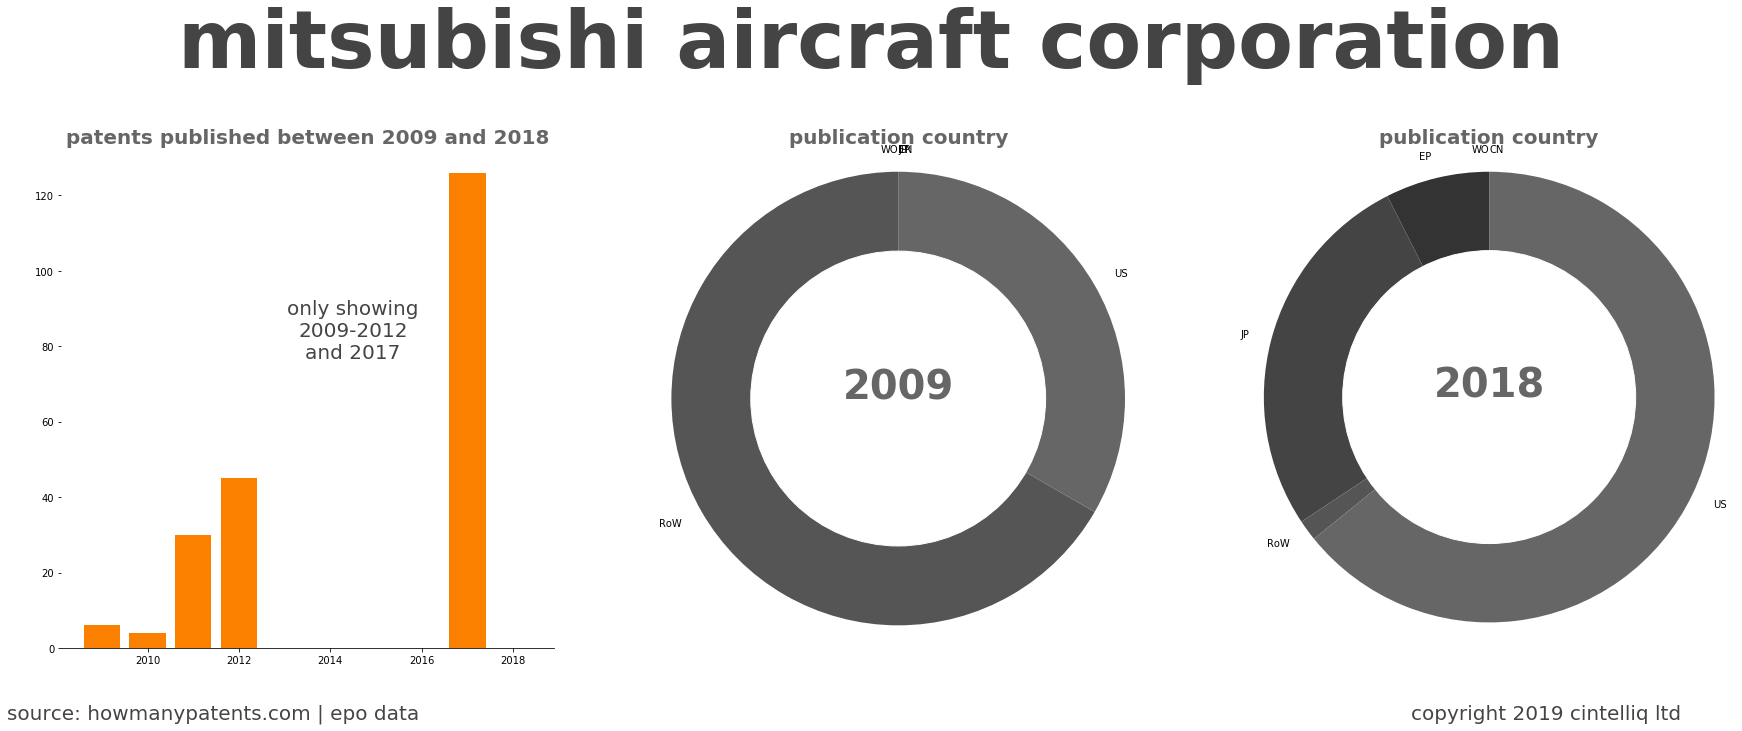 summary of patents for Mitsubishi Aircraft Corporation